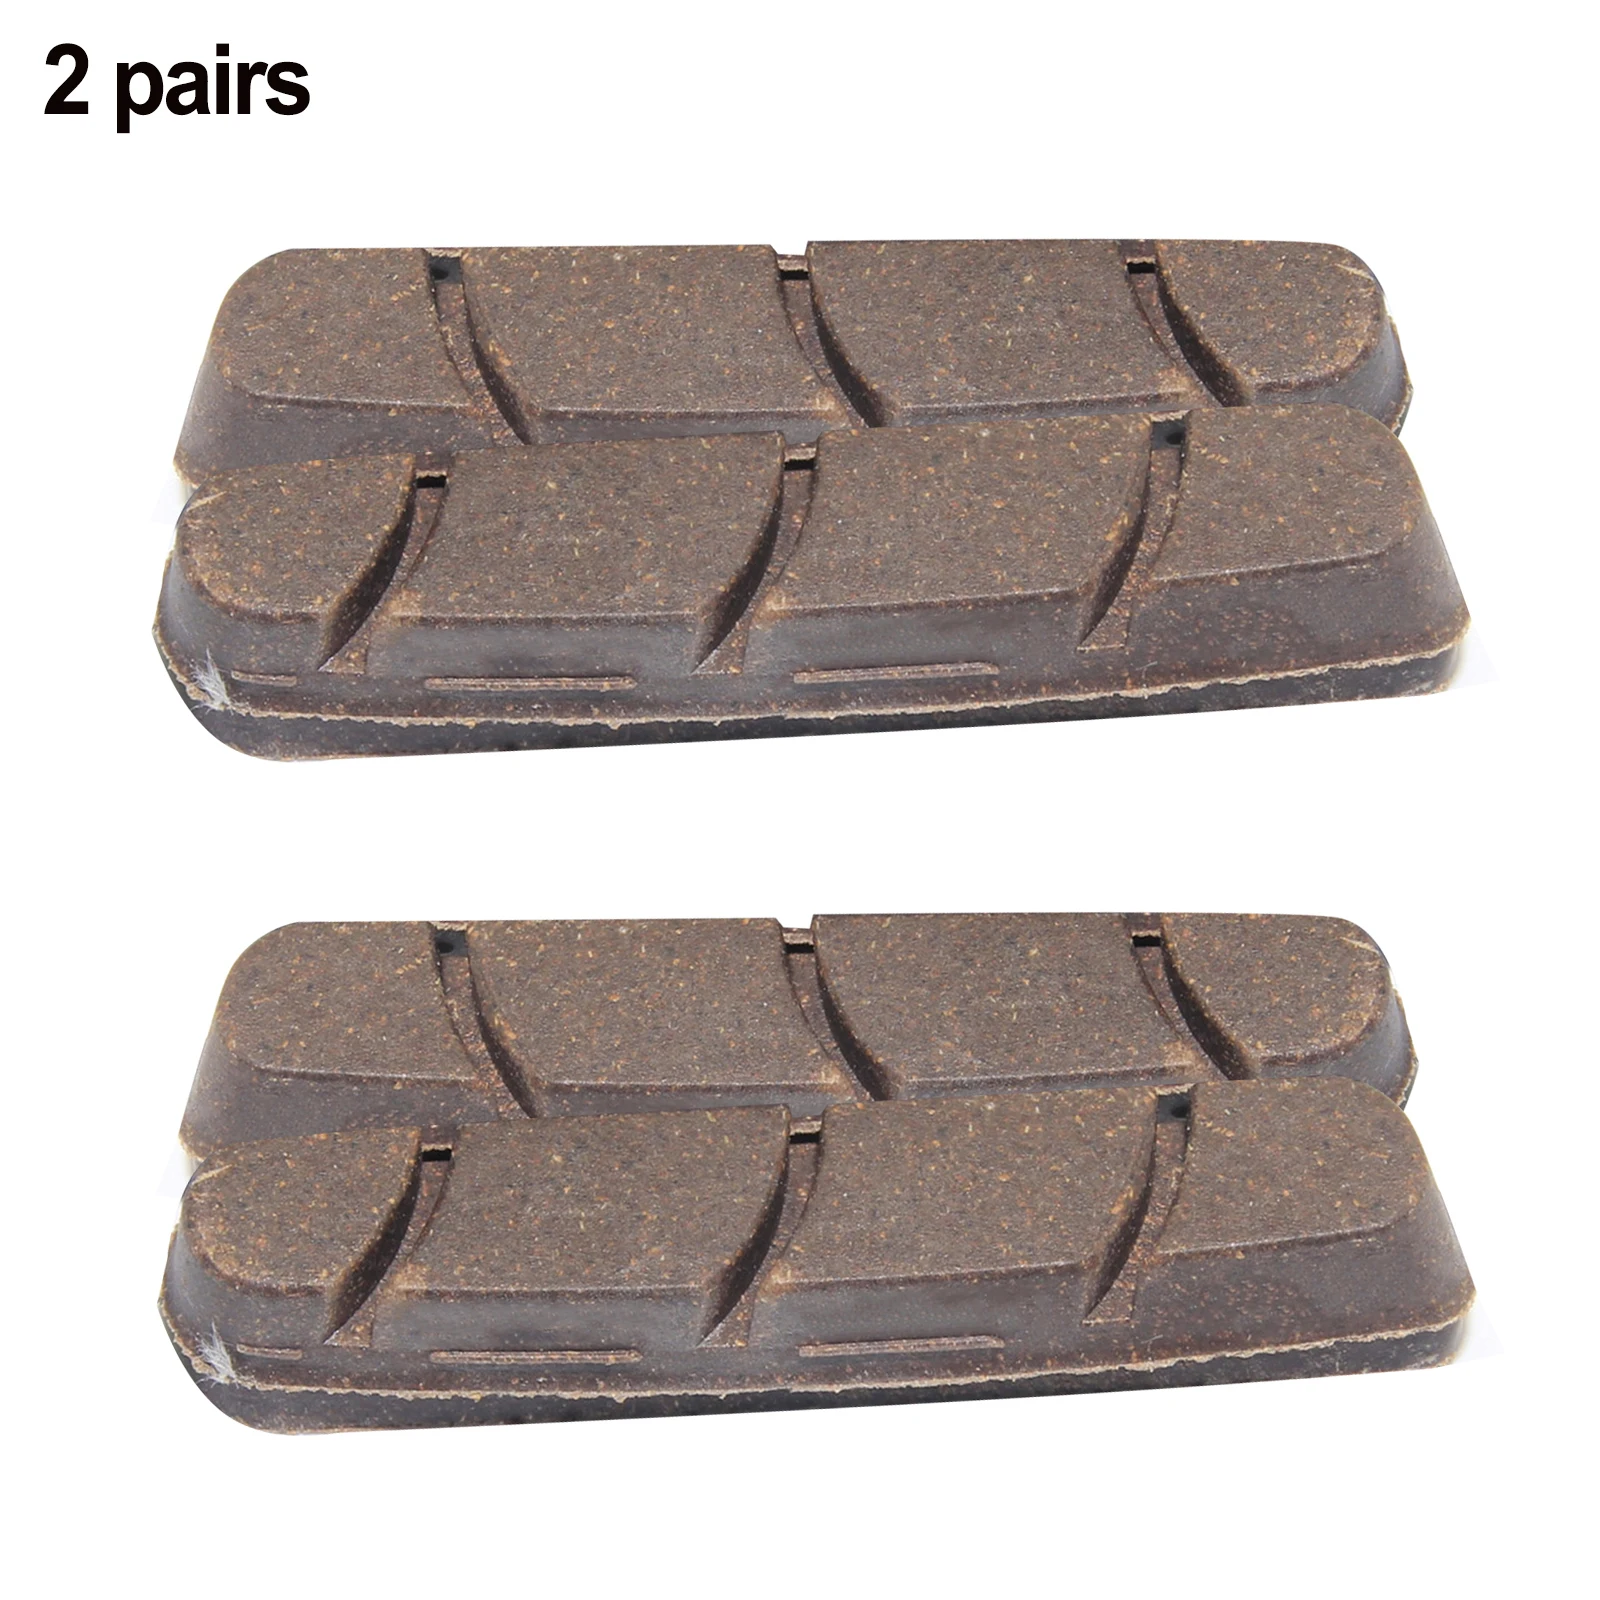 

Brake Pad Brake Pads Braided Composite Carbon Cycling Parts For CP Chrous Rim Wheels 2pair 55mm Brake Pads Durable